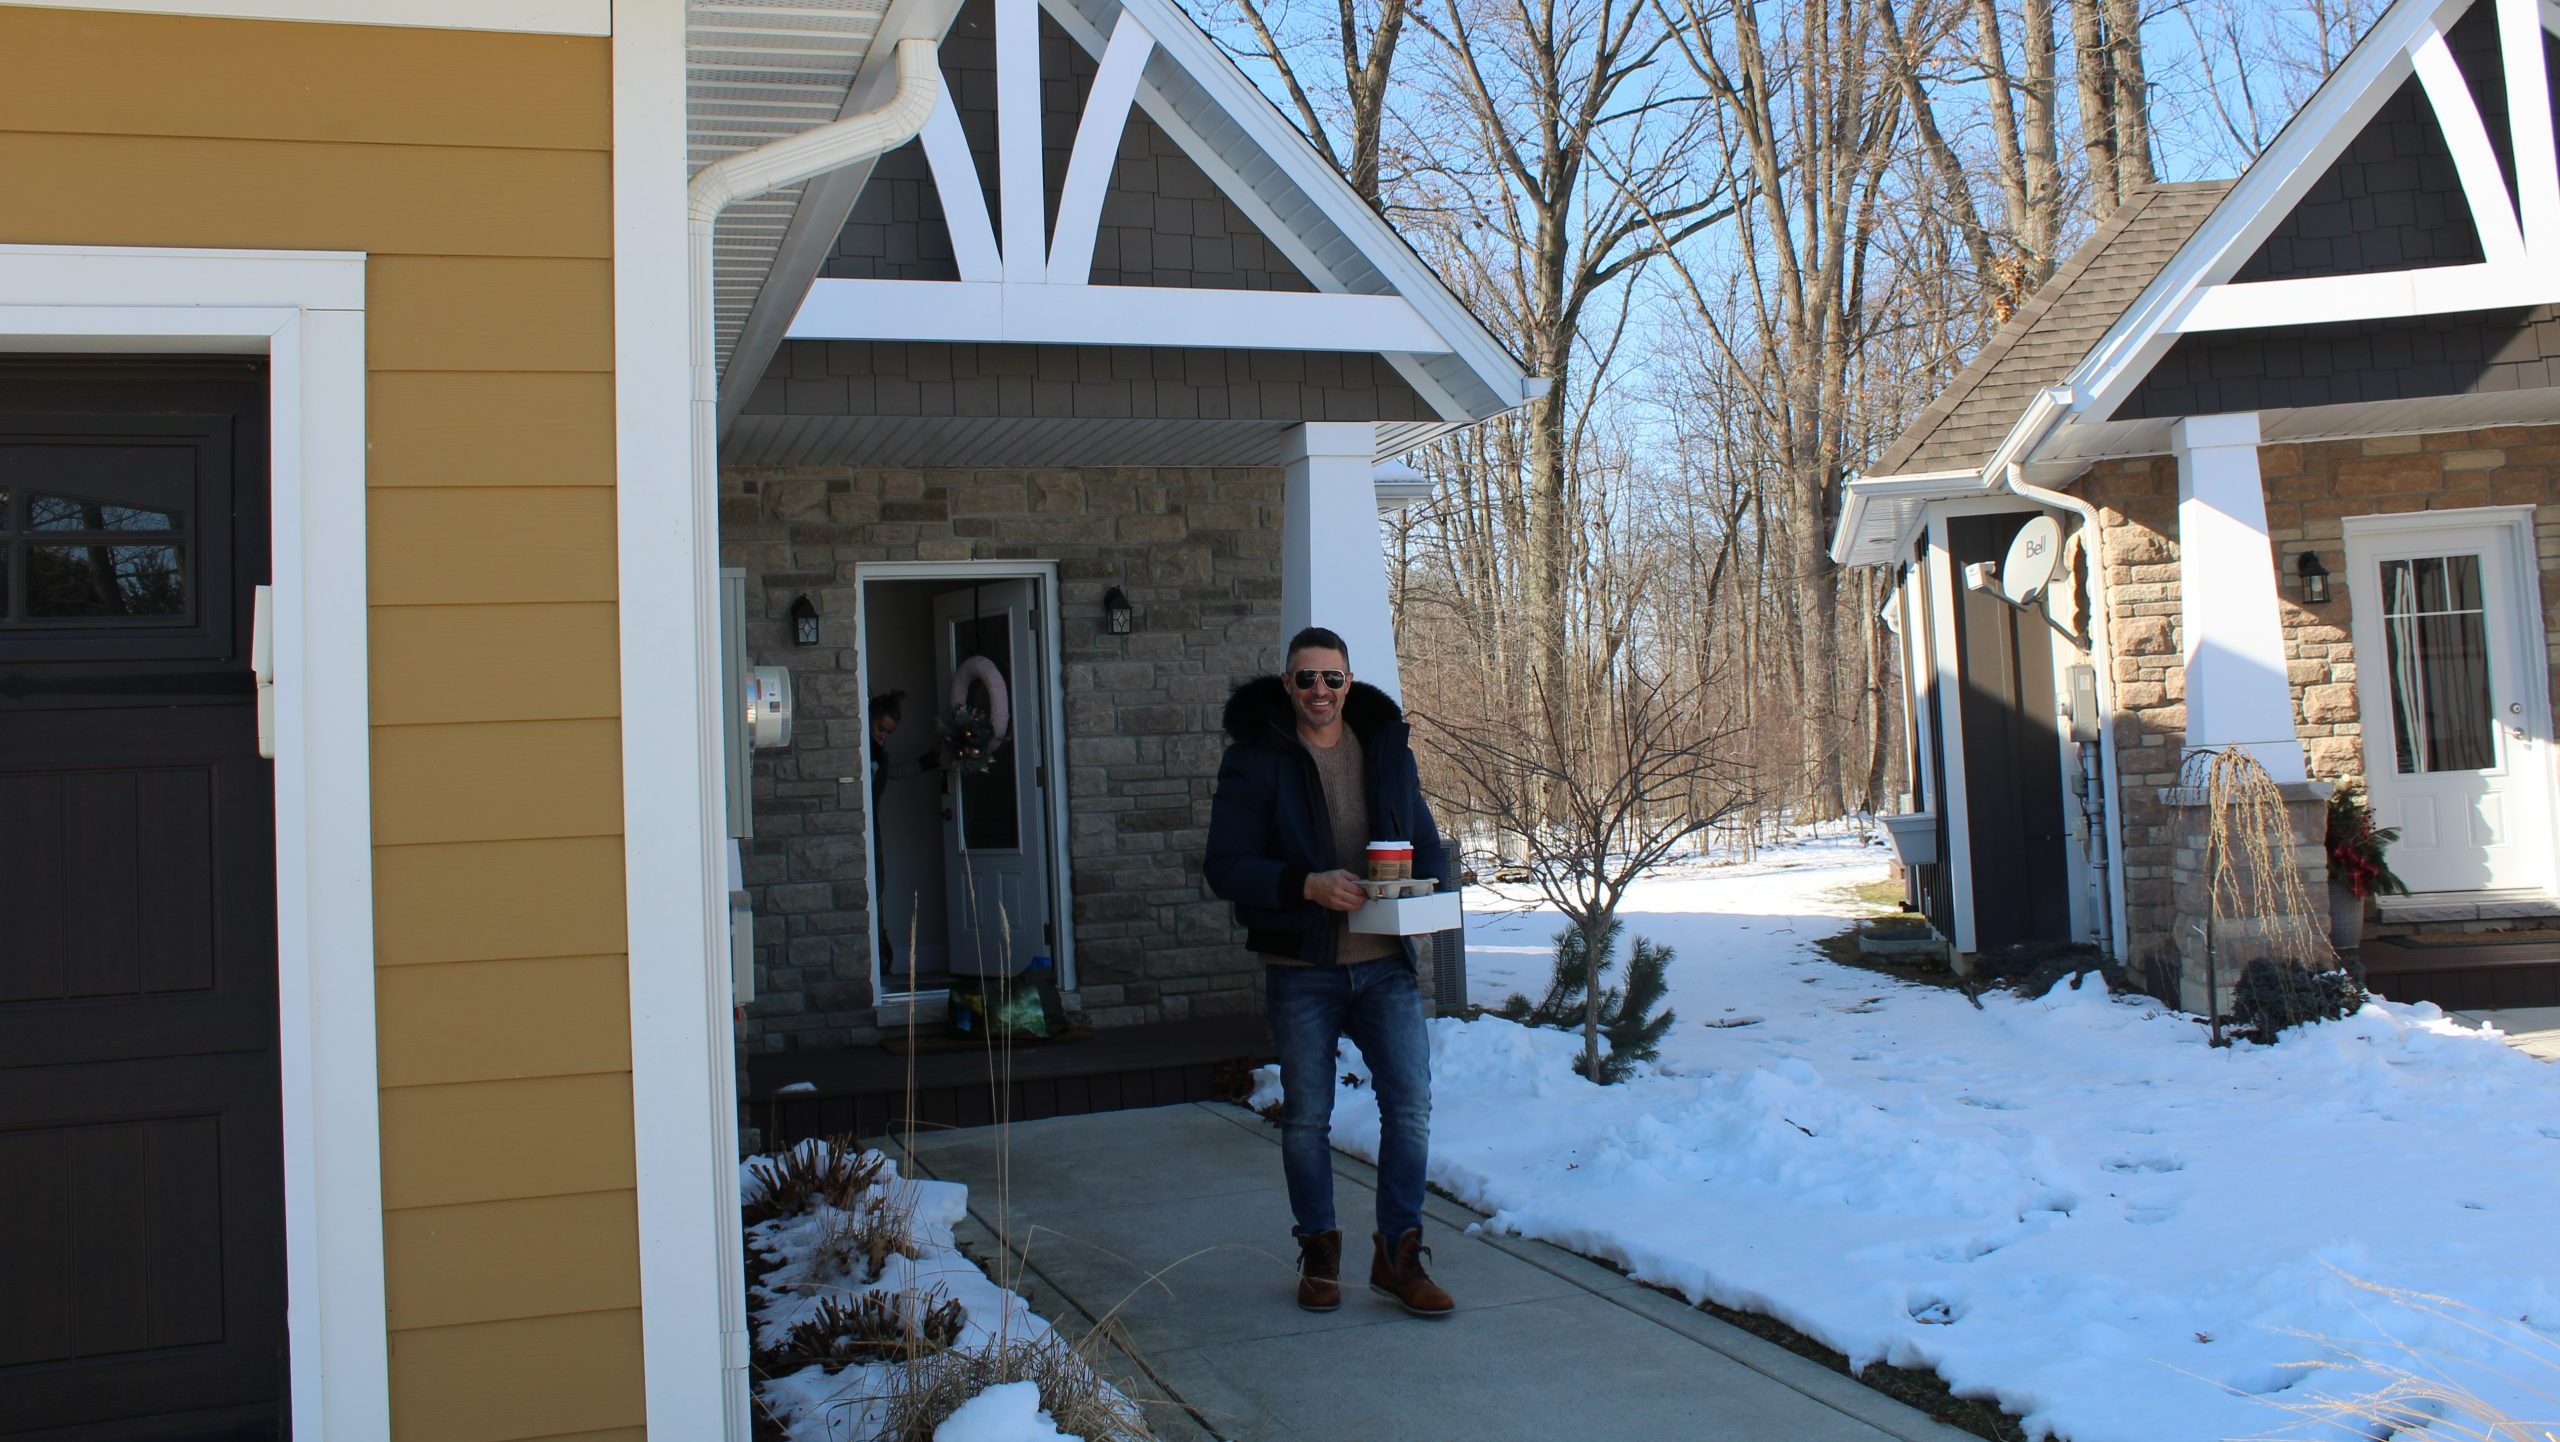 Dave Buzzeo steps out of his AirBnB property while his wife, Melissa Buzzeo, peaks out the front door.